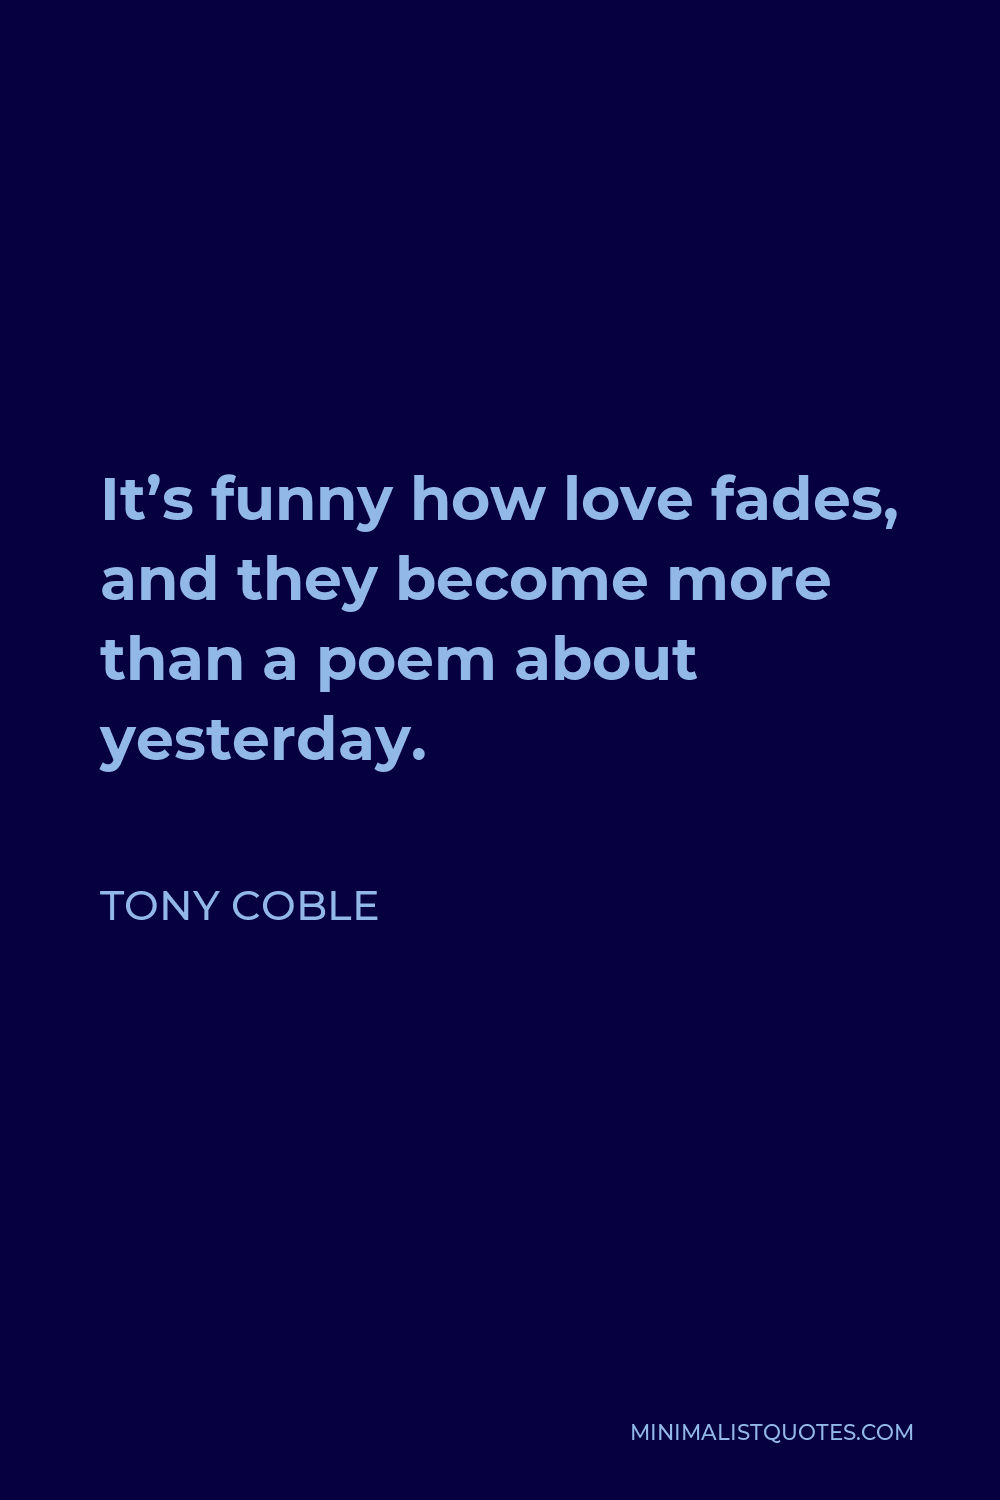 Tony Coble Quote: It's funny how love fades, and they become more than a  poem about yesterday.